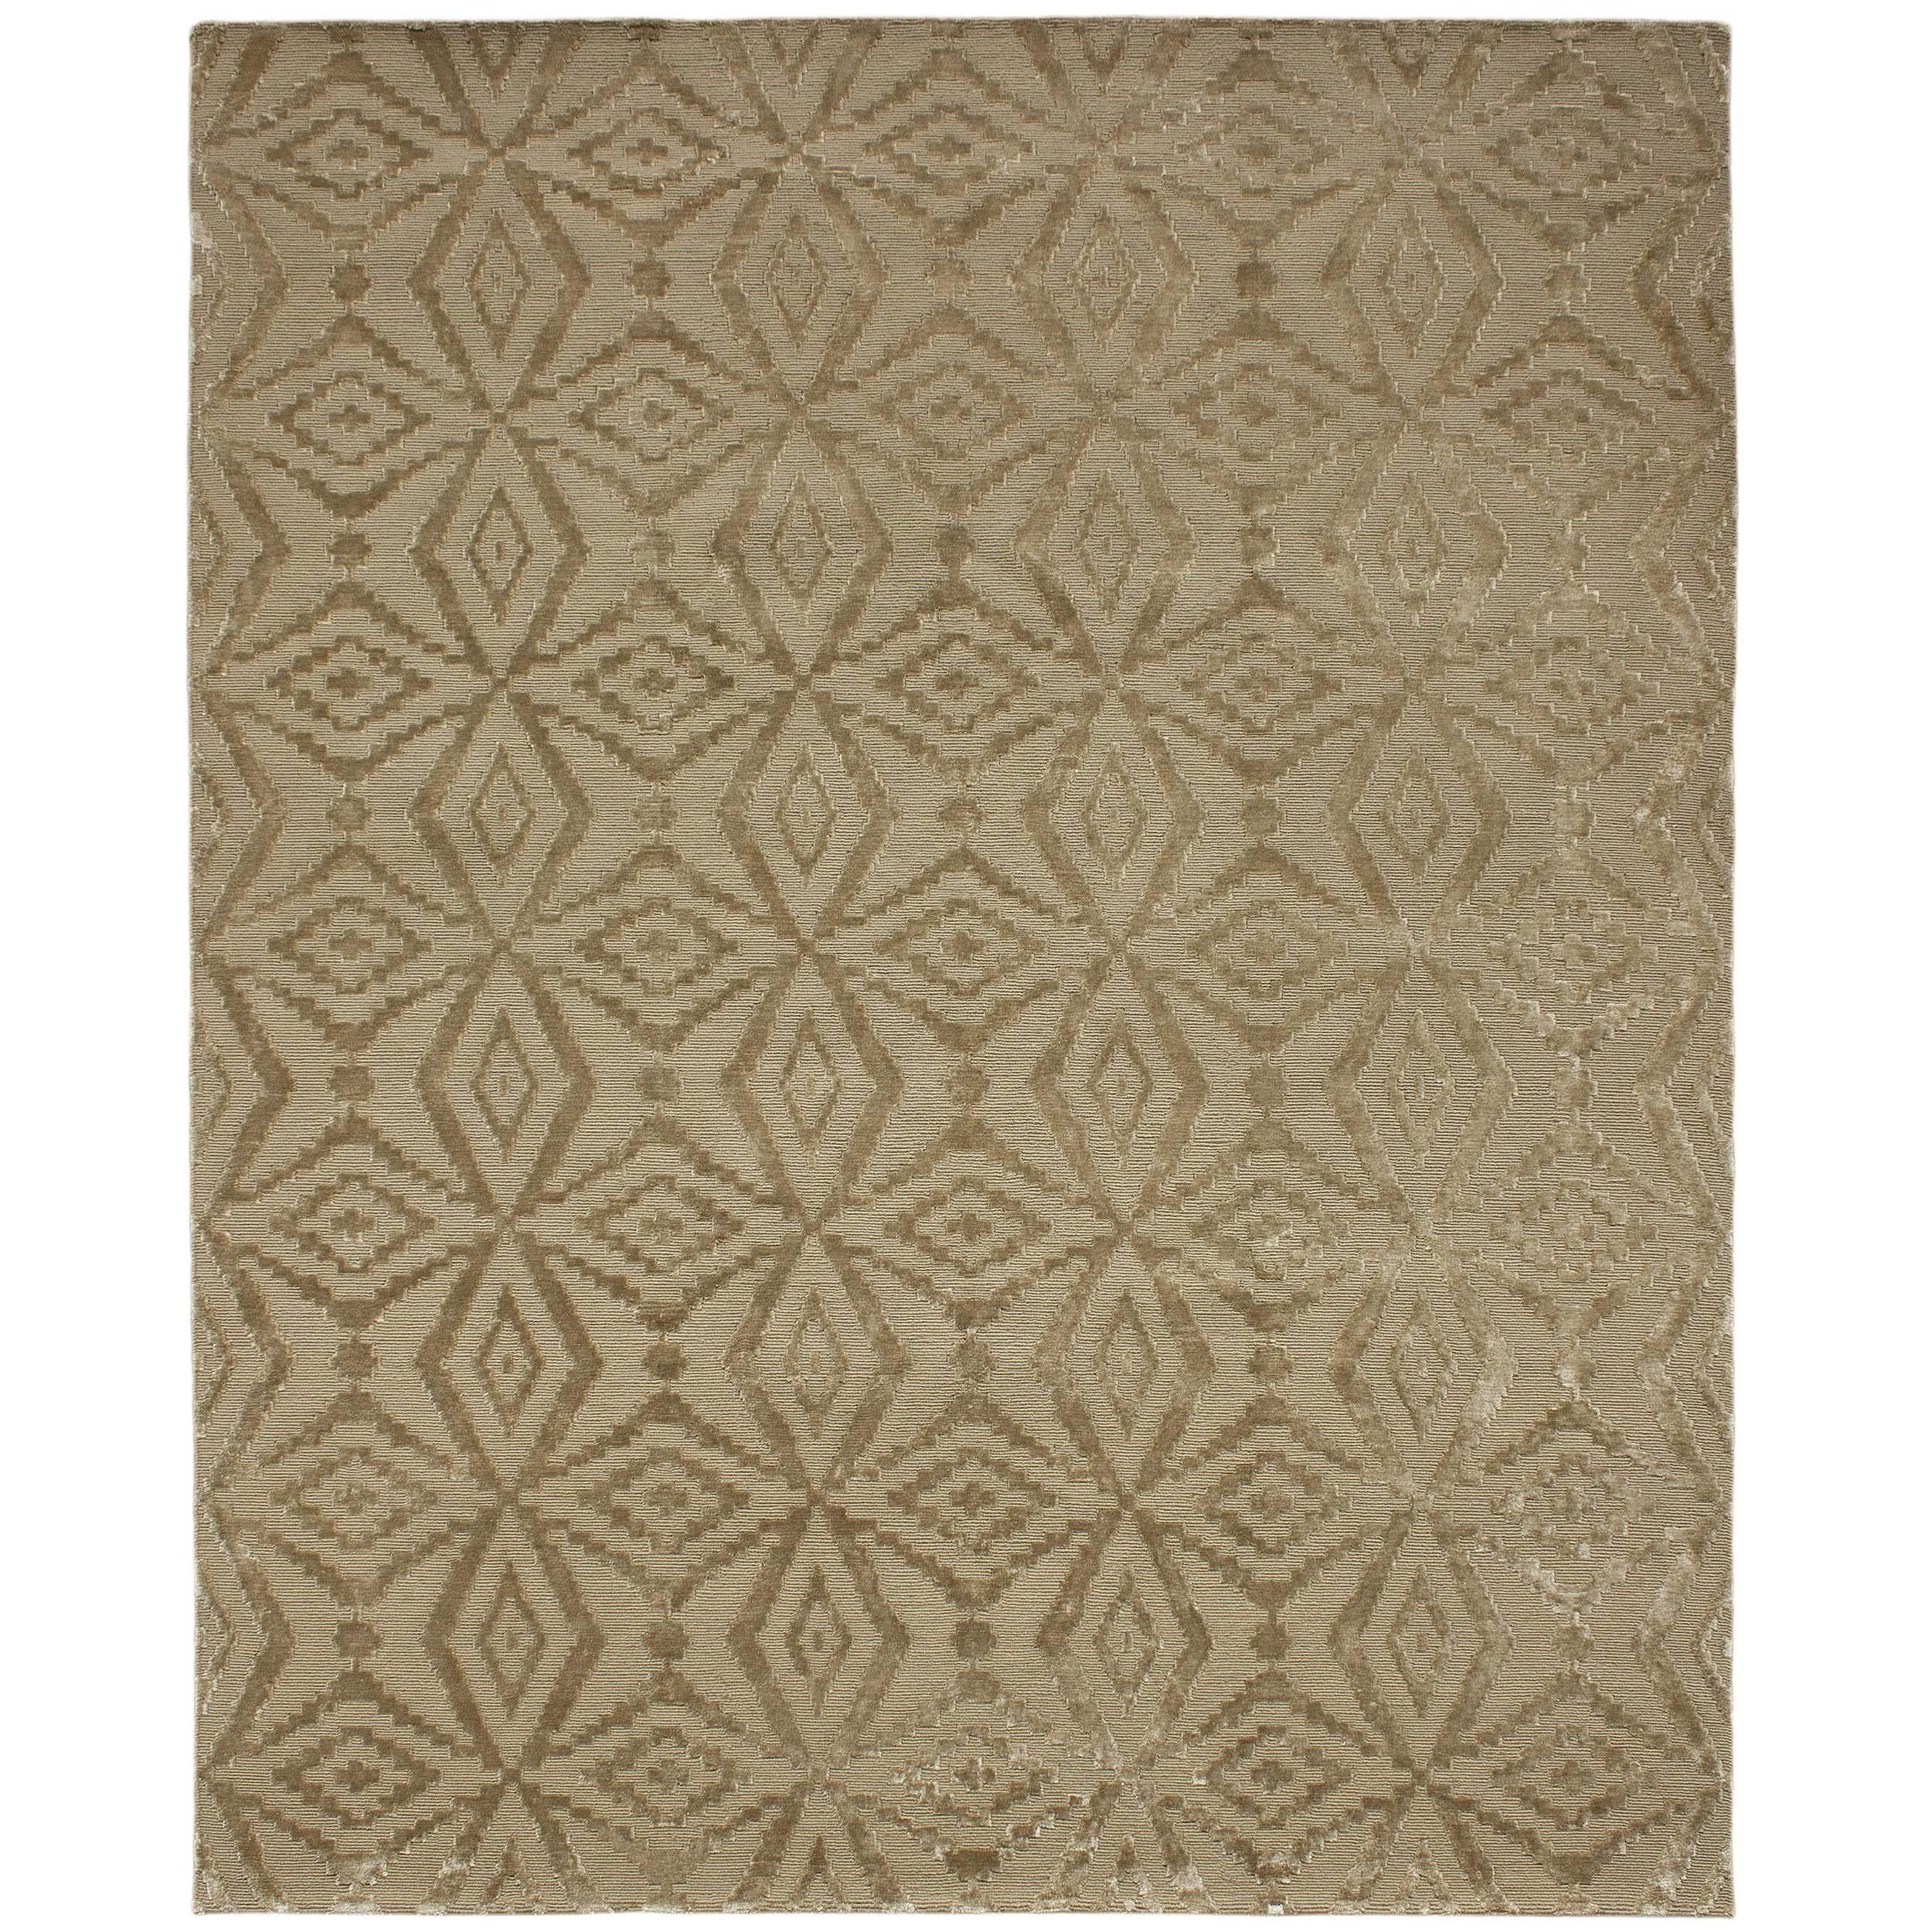 Luxury Modern Hand-Knotted Thistle Rye 10x14 Rug